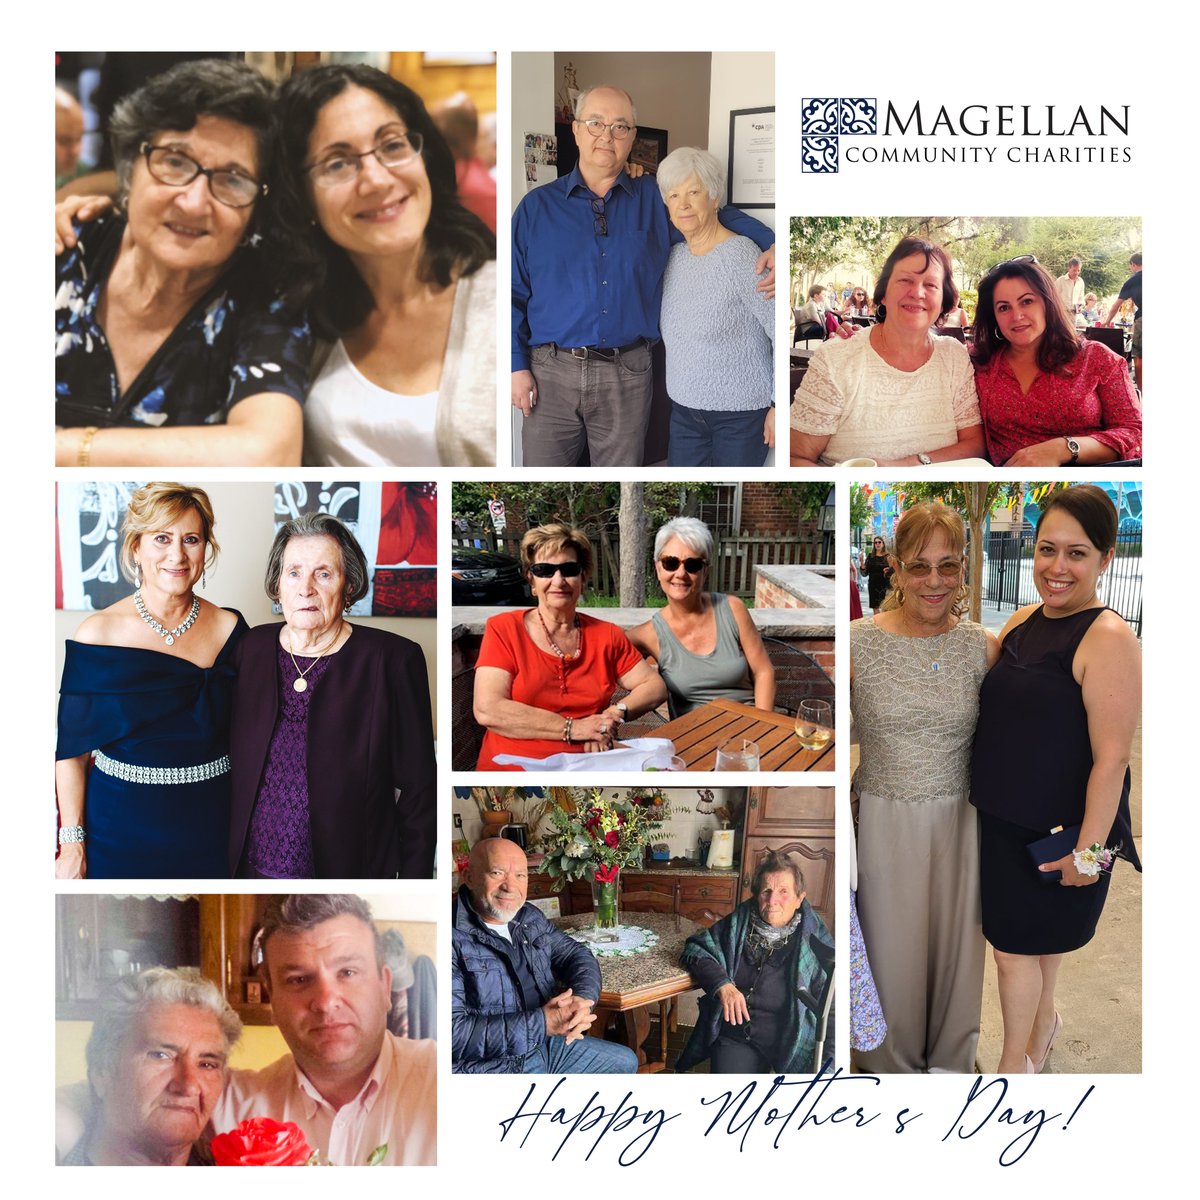 Happy Mother's Day! Today, Magellan Community Charities celebrates all mothers and mother figures who pour their hearts into shaping our communities. Whether you're a mom, grandma, aunt, or mentor, your love and guidance make a world of difference. 
#MothersDay #EverydayHeroes